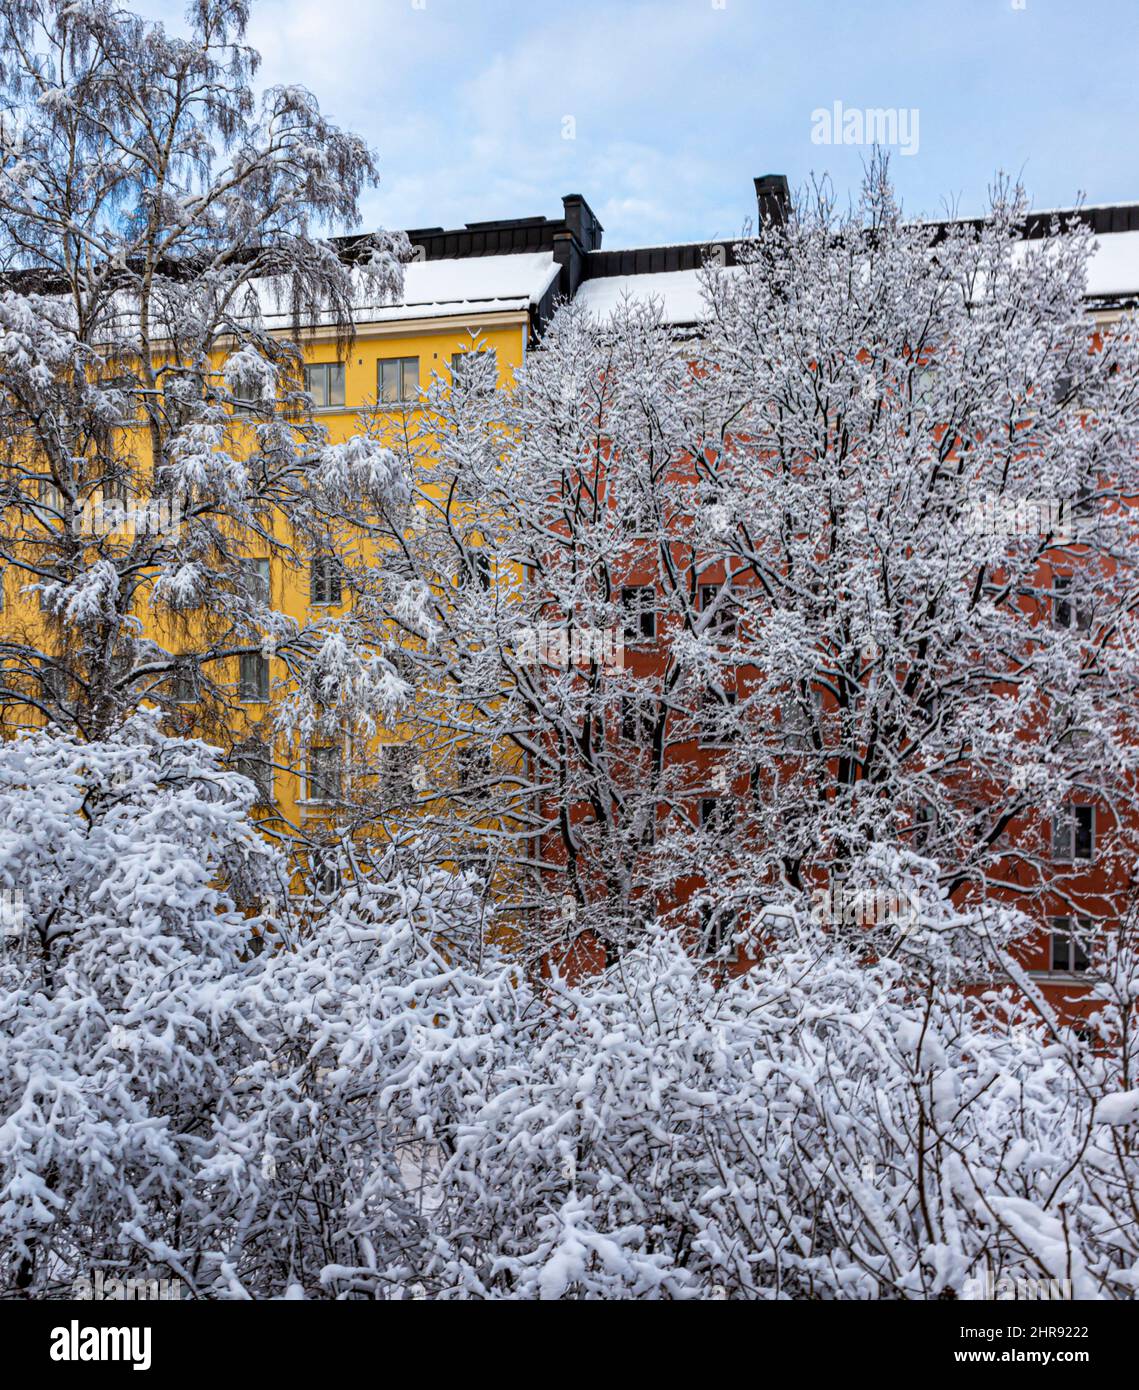 Snow on trees in Katri Vala park, Helsinki, Finland. Mid-rise residential buildings in the background. Stock Photo